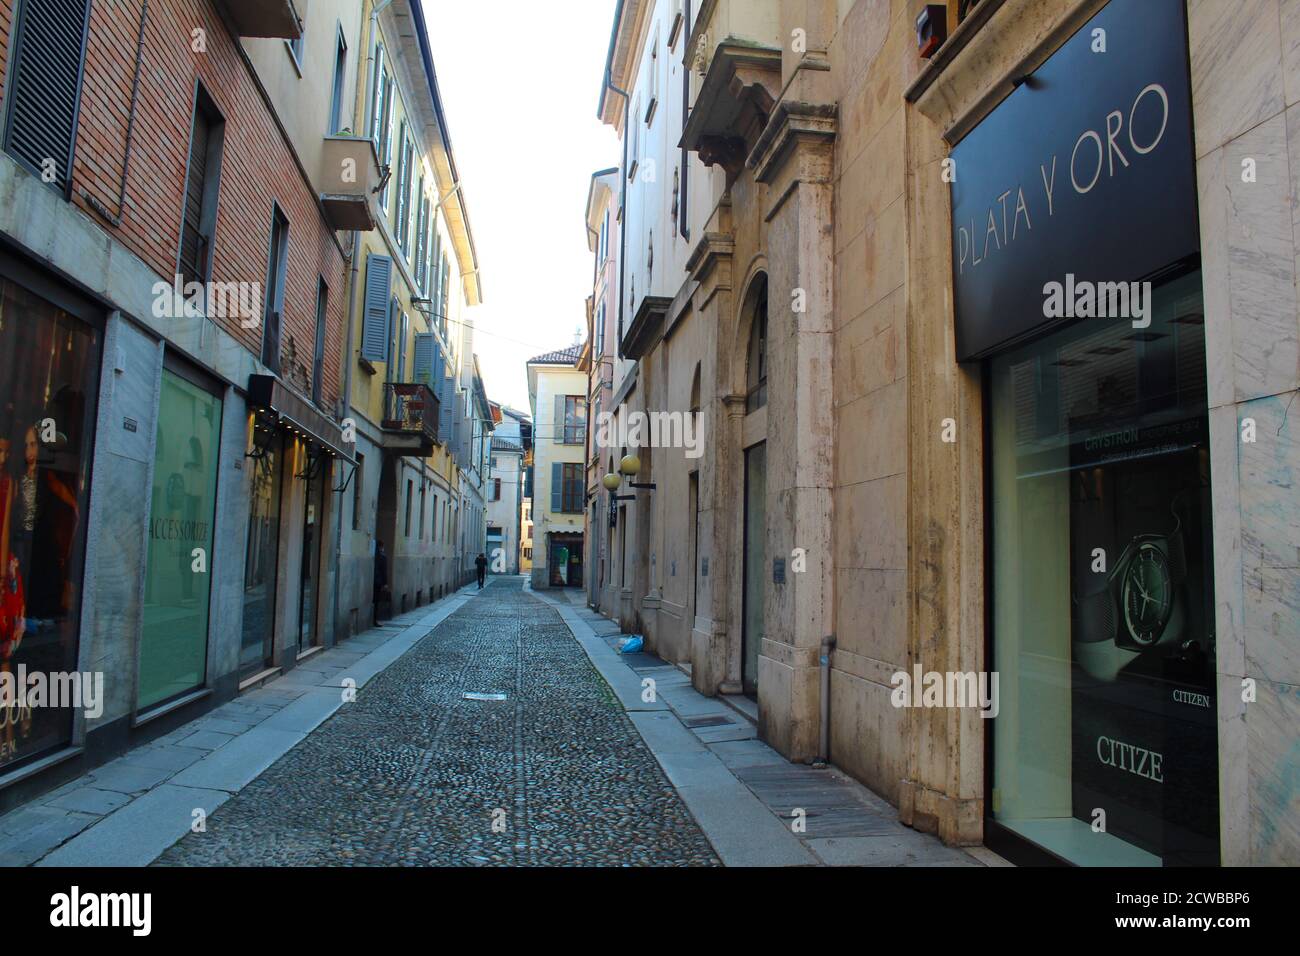 closed shops, cafe and restaurants in the deserted streets in the quarantined town of Pavia, Lombardy, Italy during the Corona (COVID-19 ) Virus pandemic March 2020. Pavia has a population of around 73,000 people and was put in Lockdown from February onwards. Stock Photo